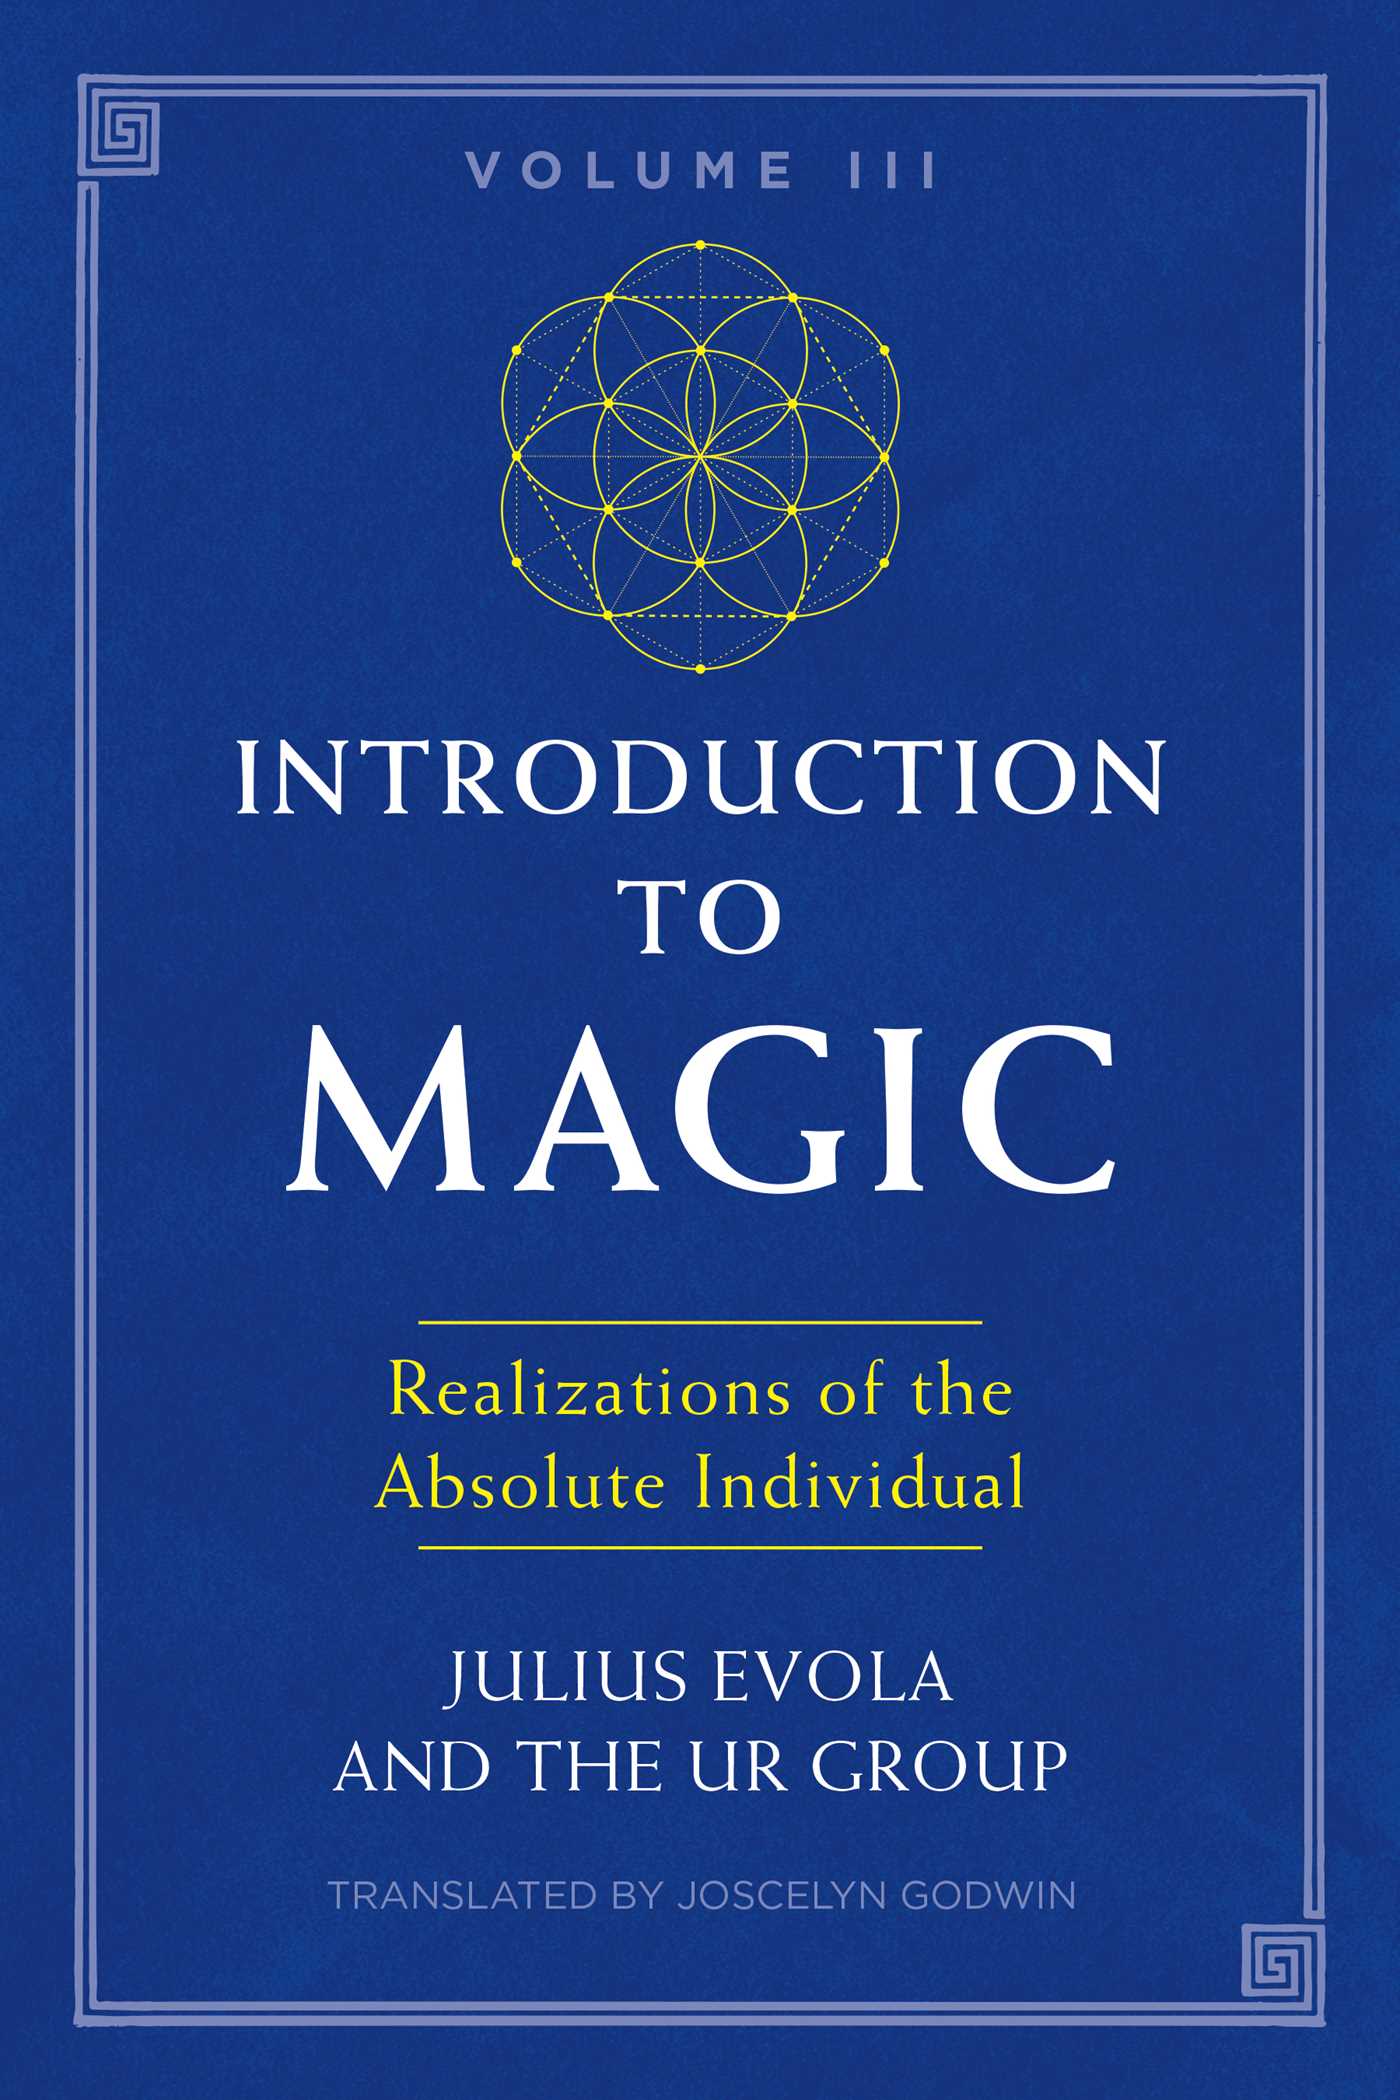 Introduction to Magic, Volume III : Realizations of the Absolute Individual | Evola, Julius